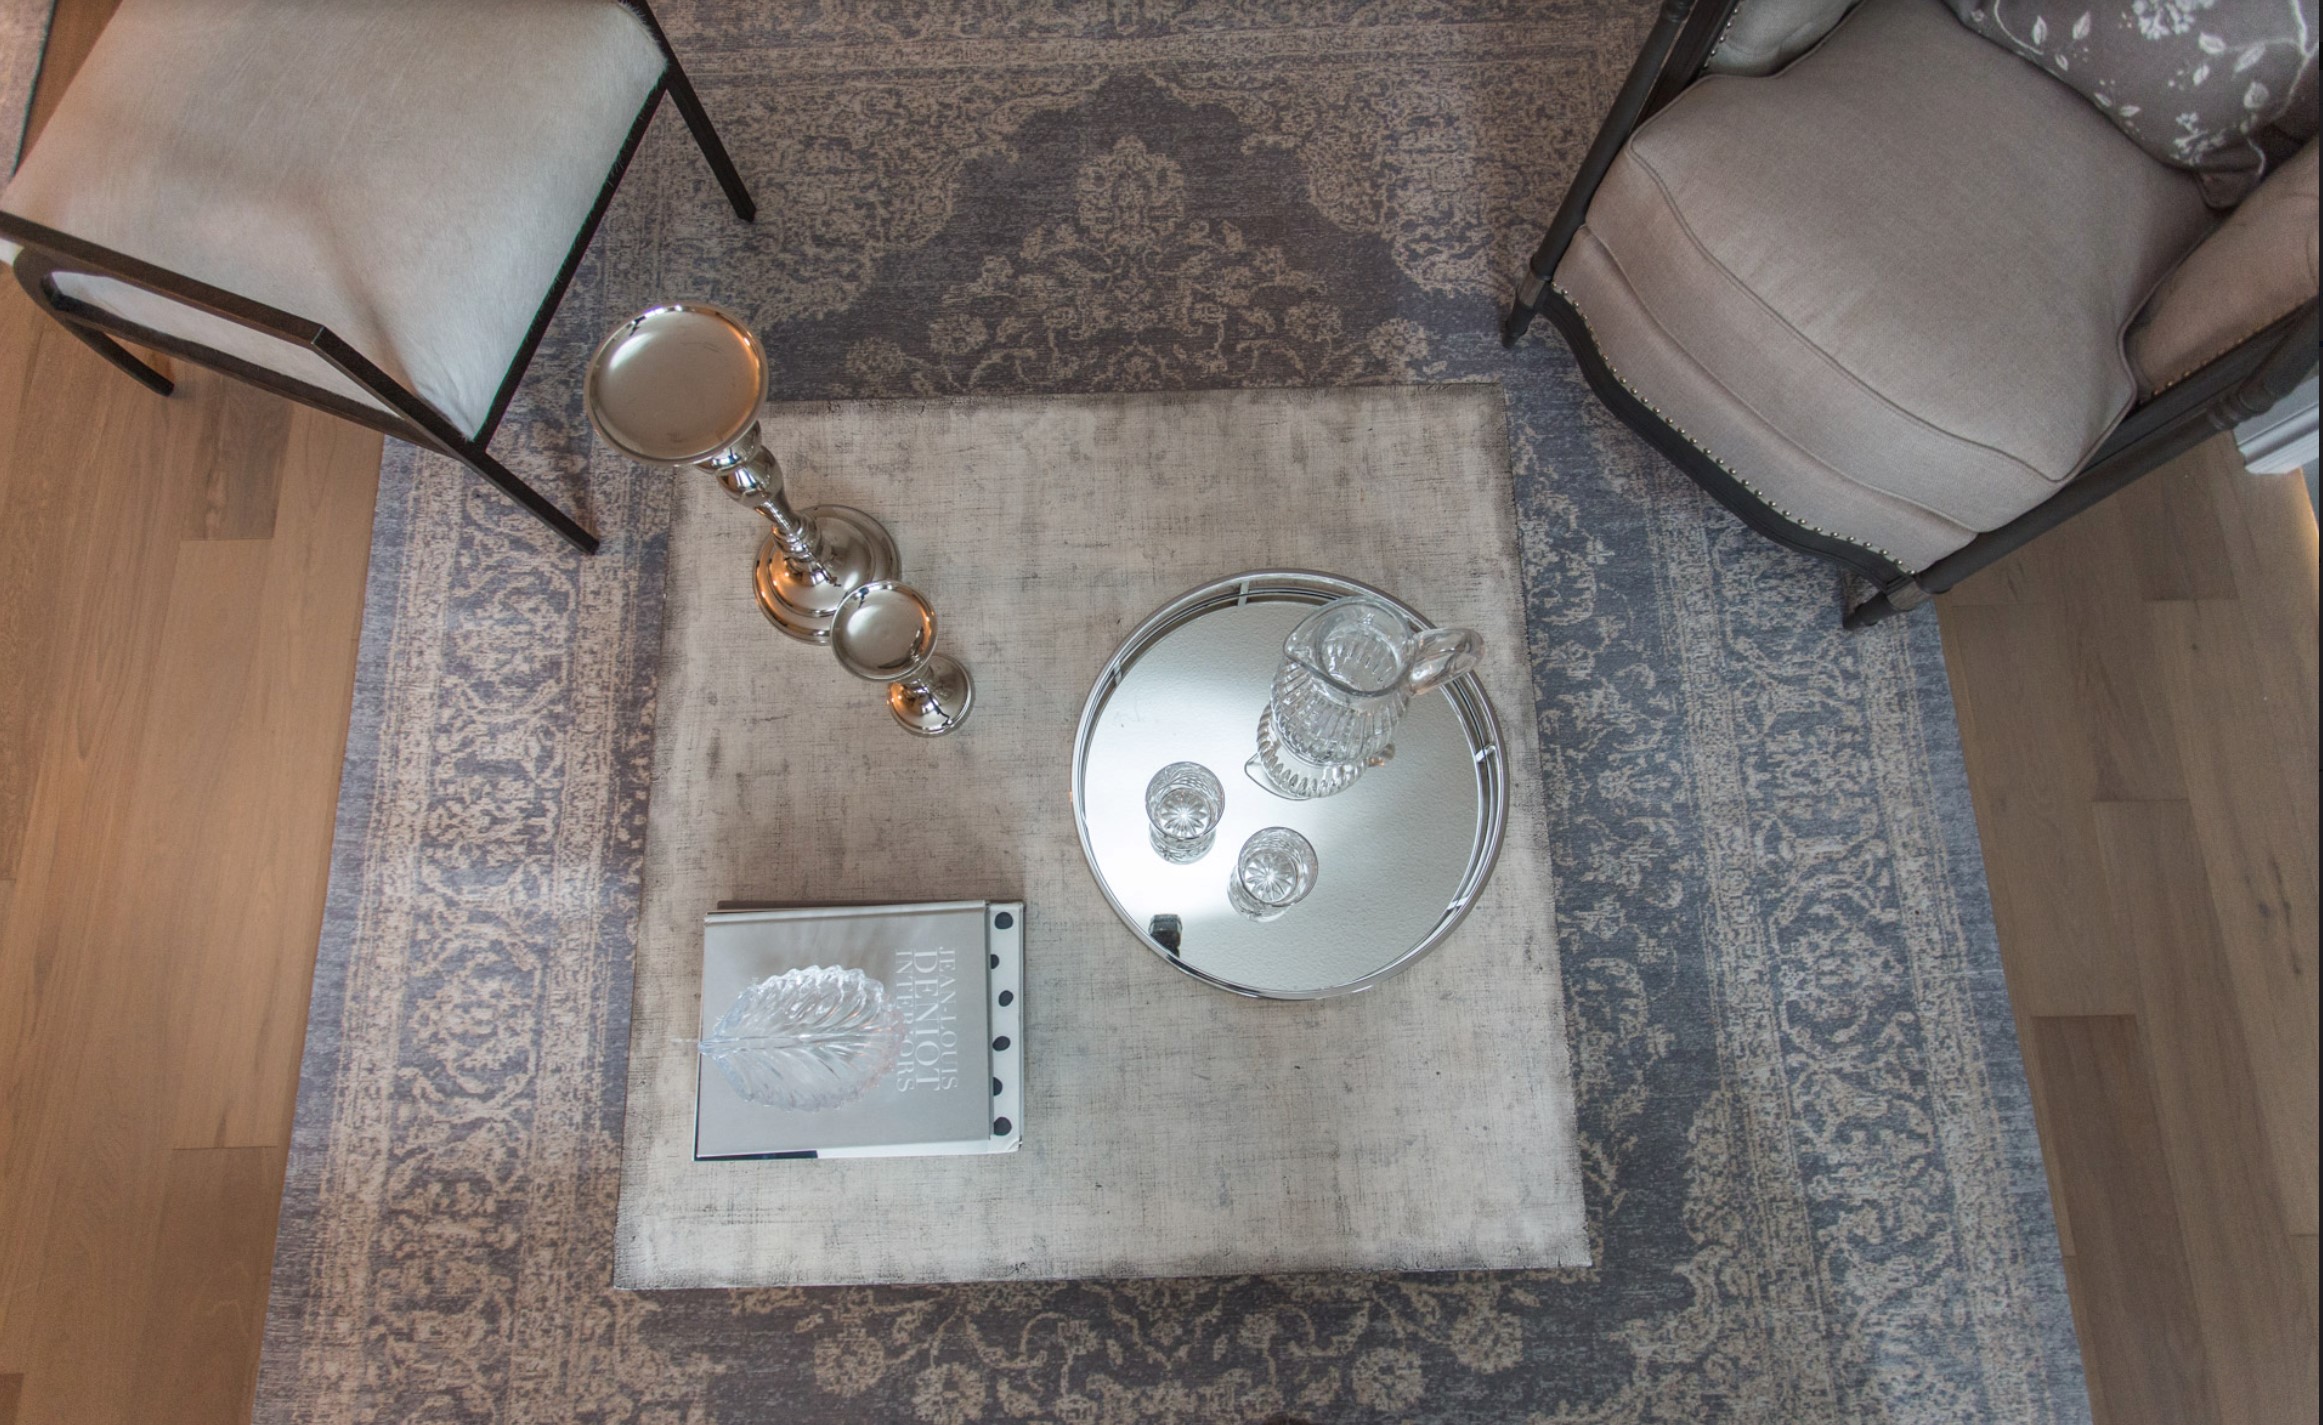 Photo of area rug and coffee table from above